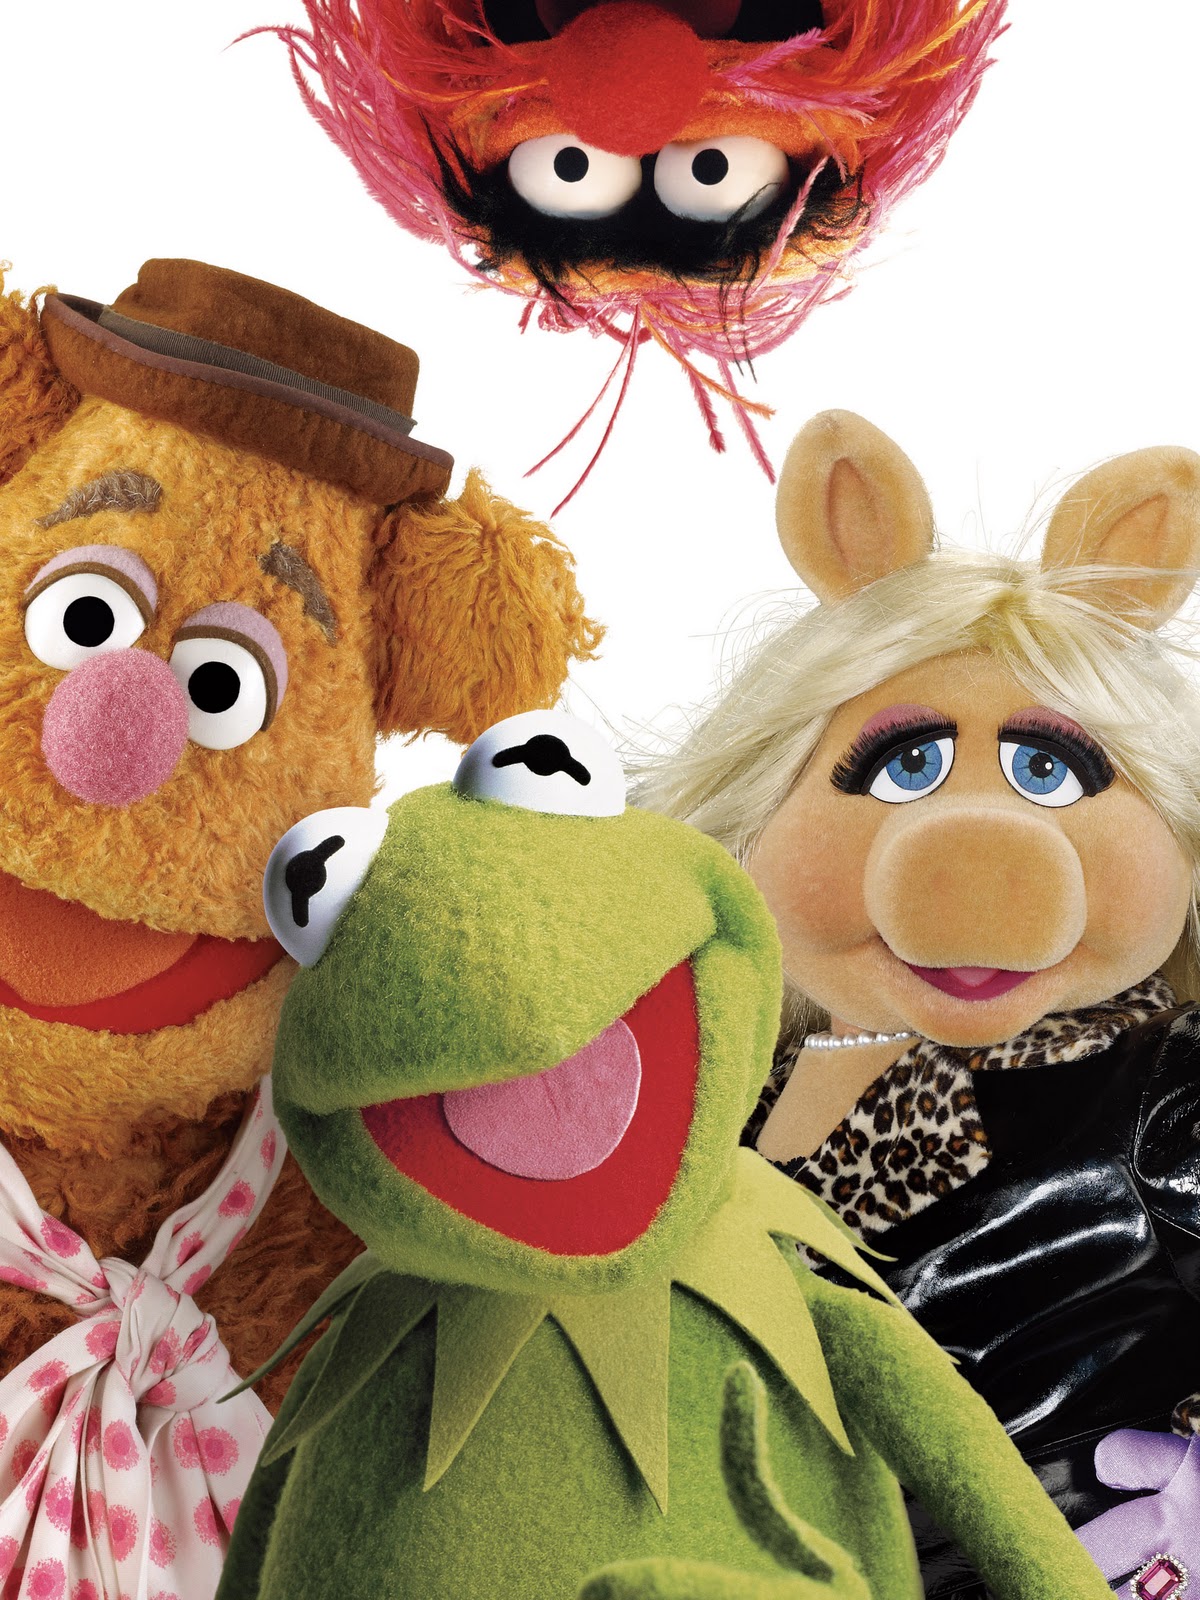 The Last Reel: The Muppets Start Filming "Again"!